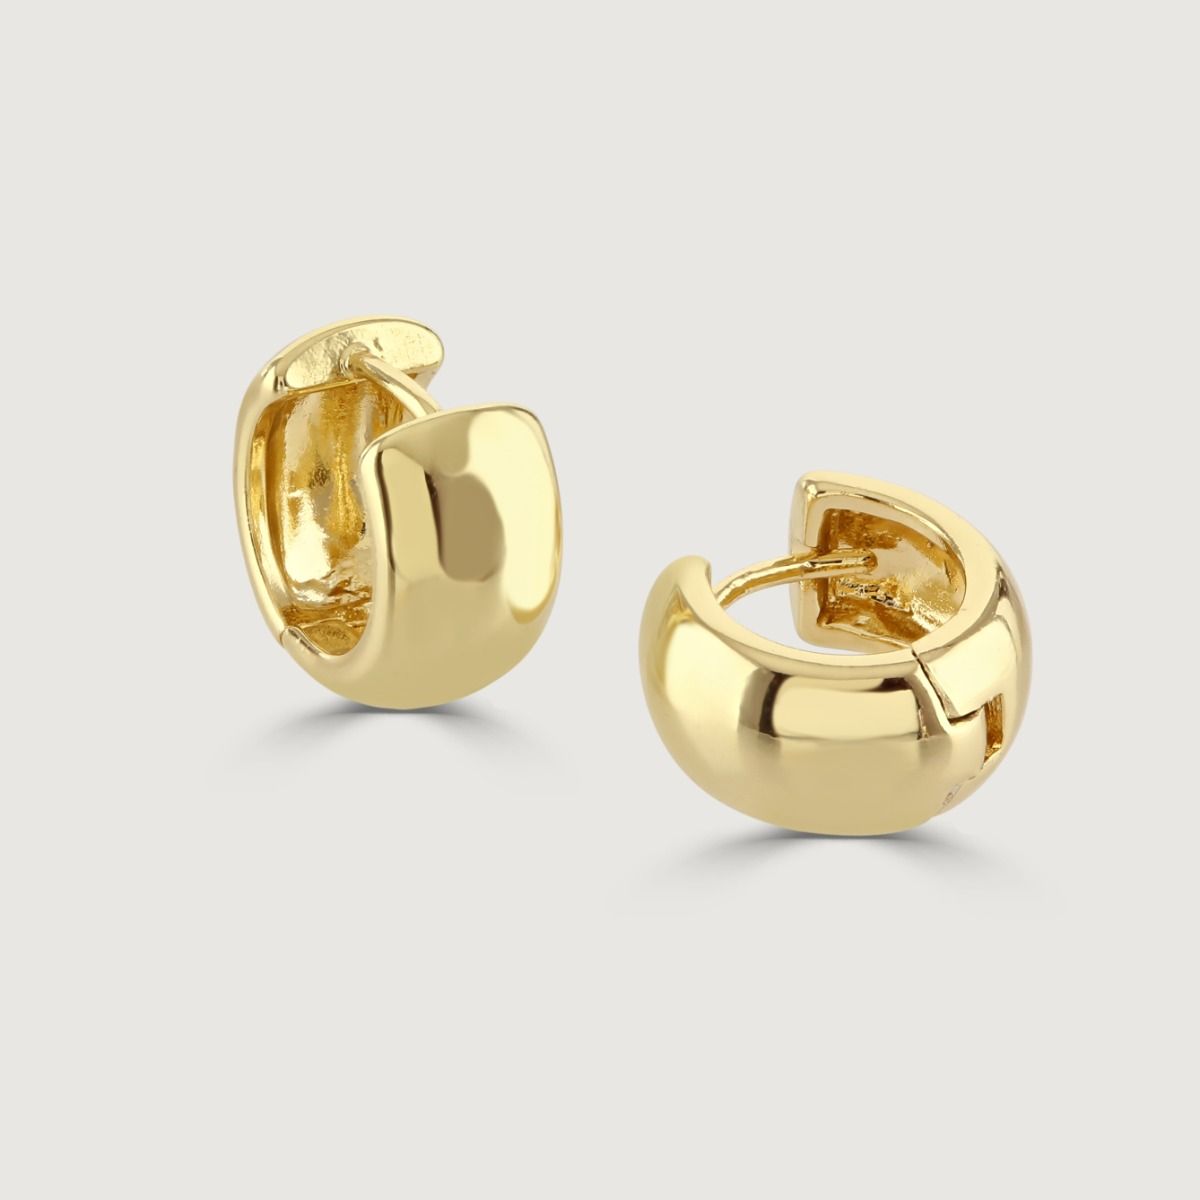 The Gold Polished Chubby Huggie Earrings perfectly takes a twist on an everyday classic. The huggie style ensures a comfortable fit whilst elevating any outfit.